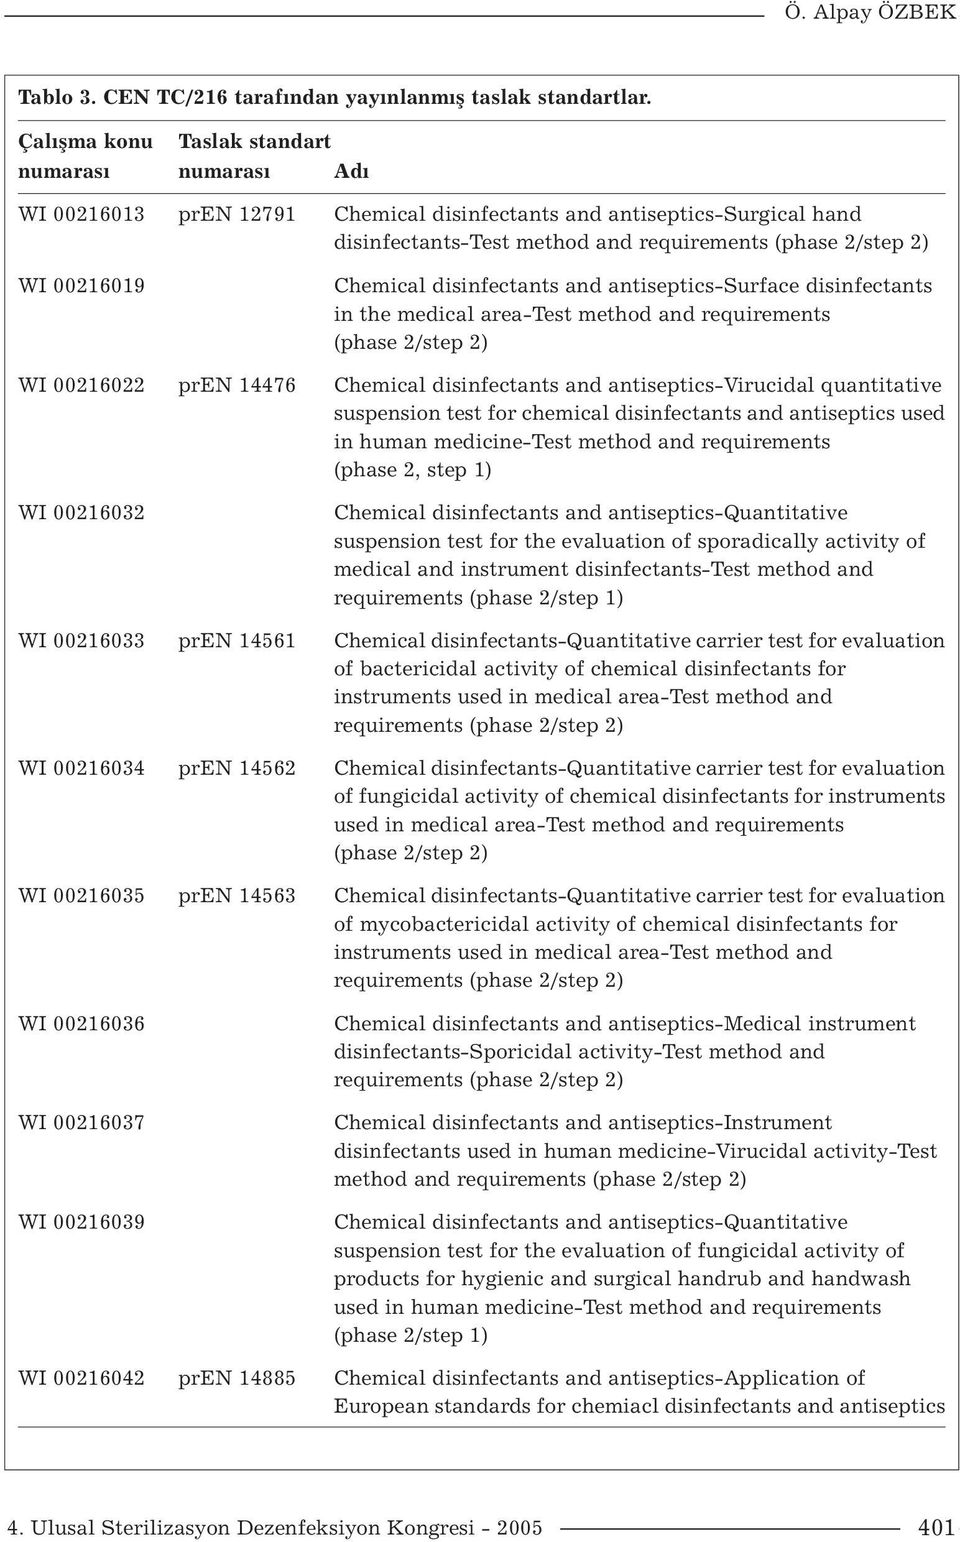 Chemical disinfectants and antiseptics-surface disinfectants in the medical area-test method and requirements (phase 2/step 2) WI 00216022 pren 14476 Chemical disinfectants and antiseptics-virucidal